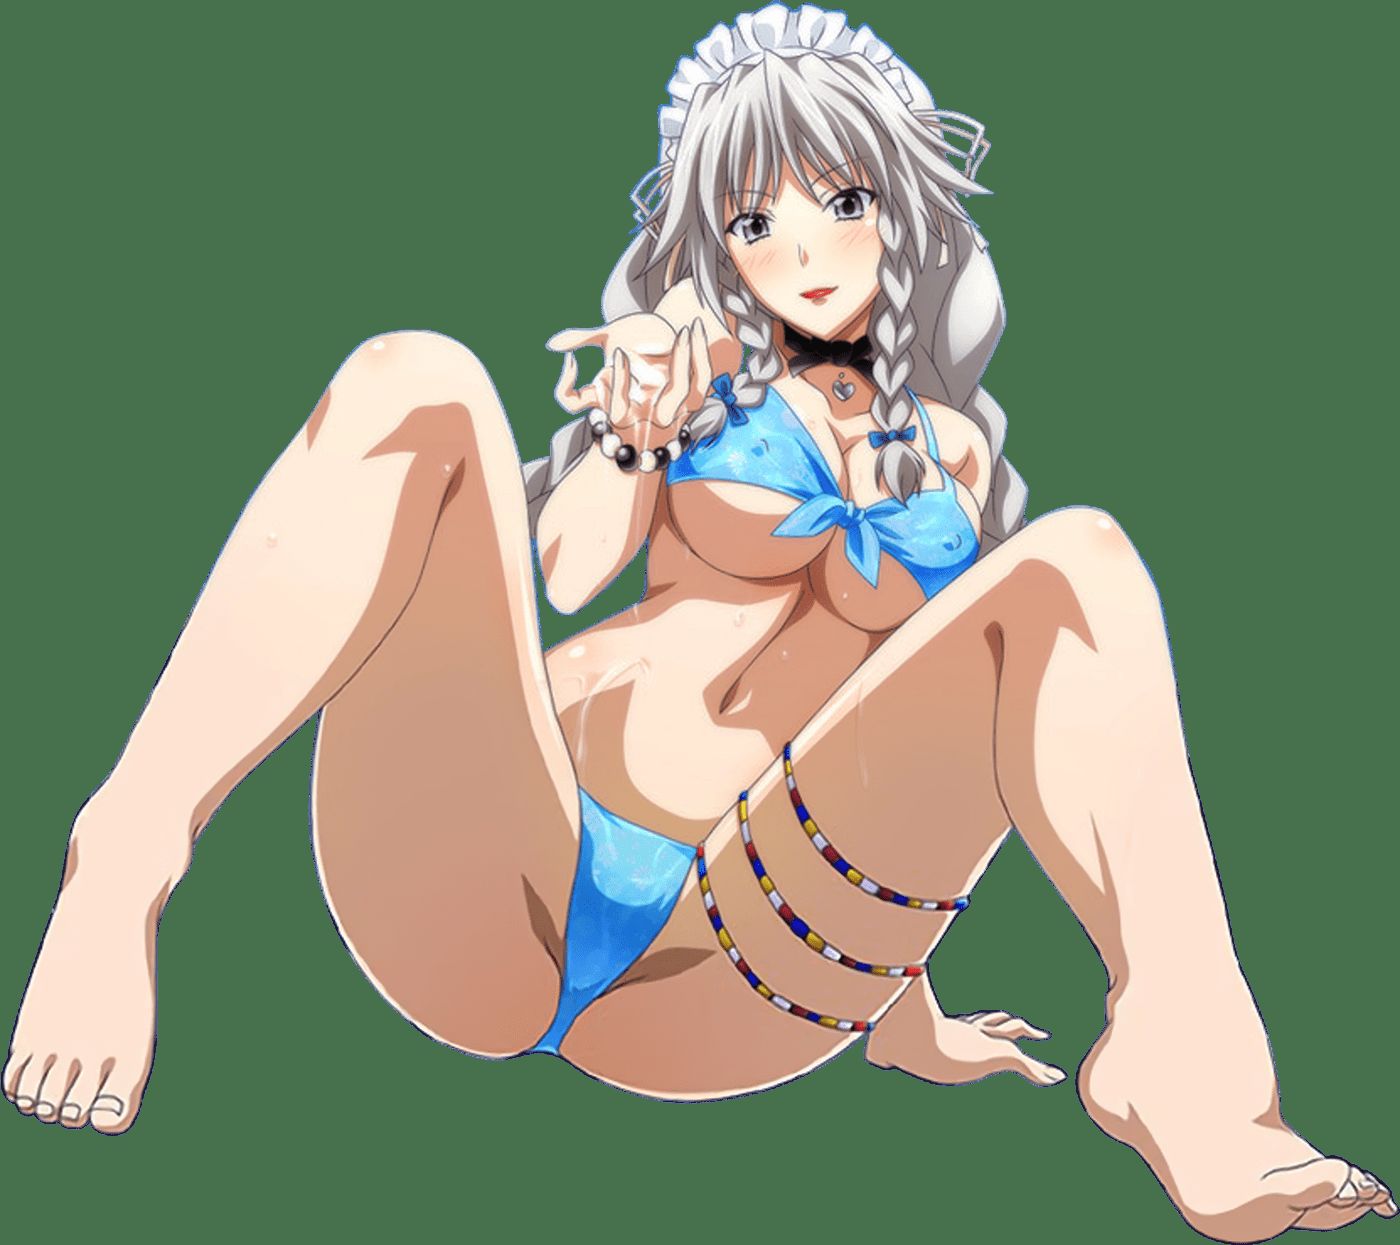 [Anime character material] png background of animated characters erotic images that 118 5